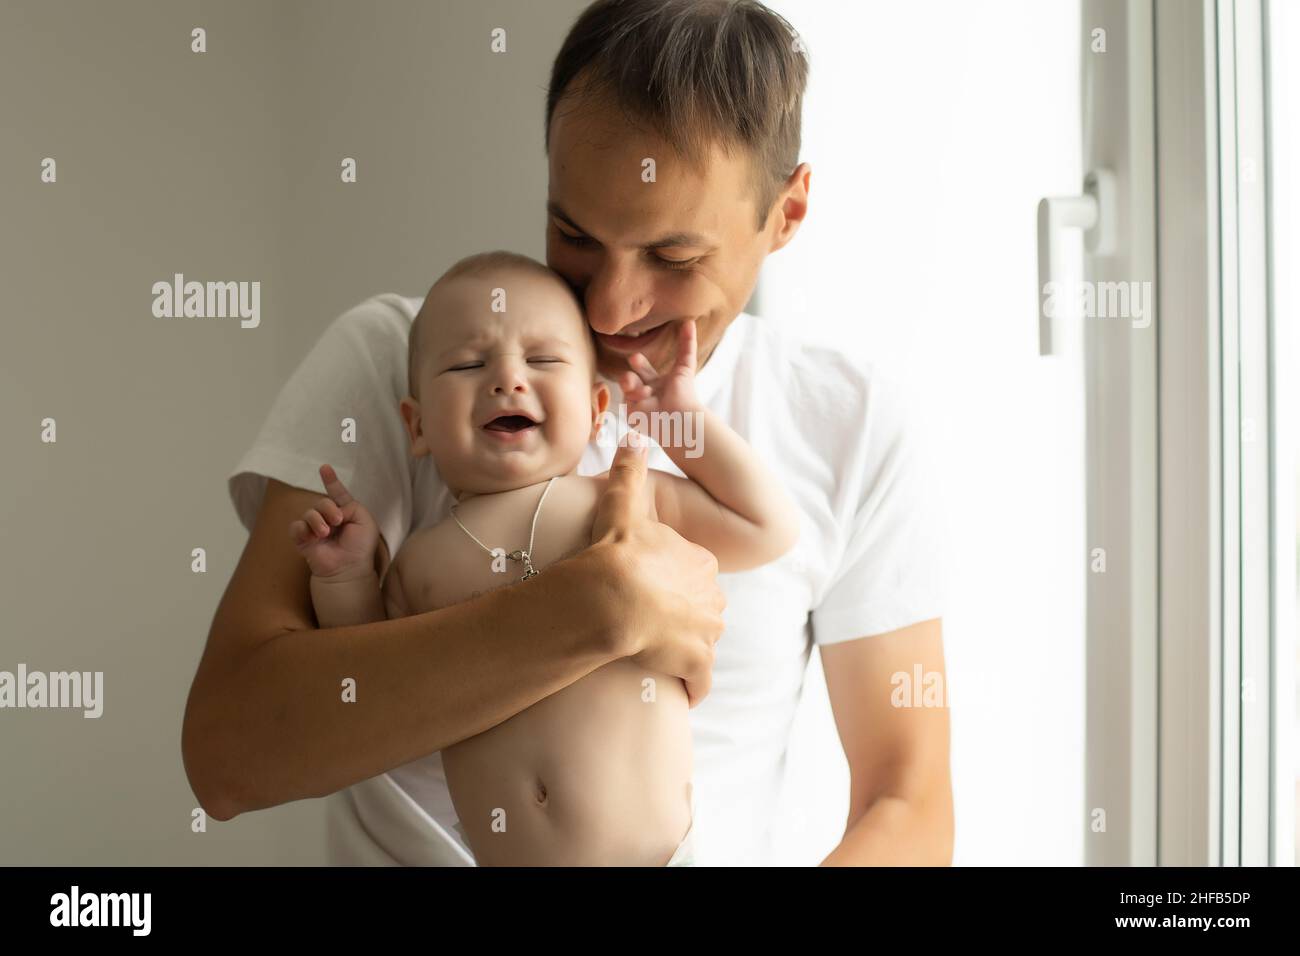 Father Hugging Newborn Baby in white bedroom. Stock Photo